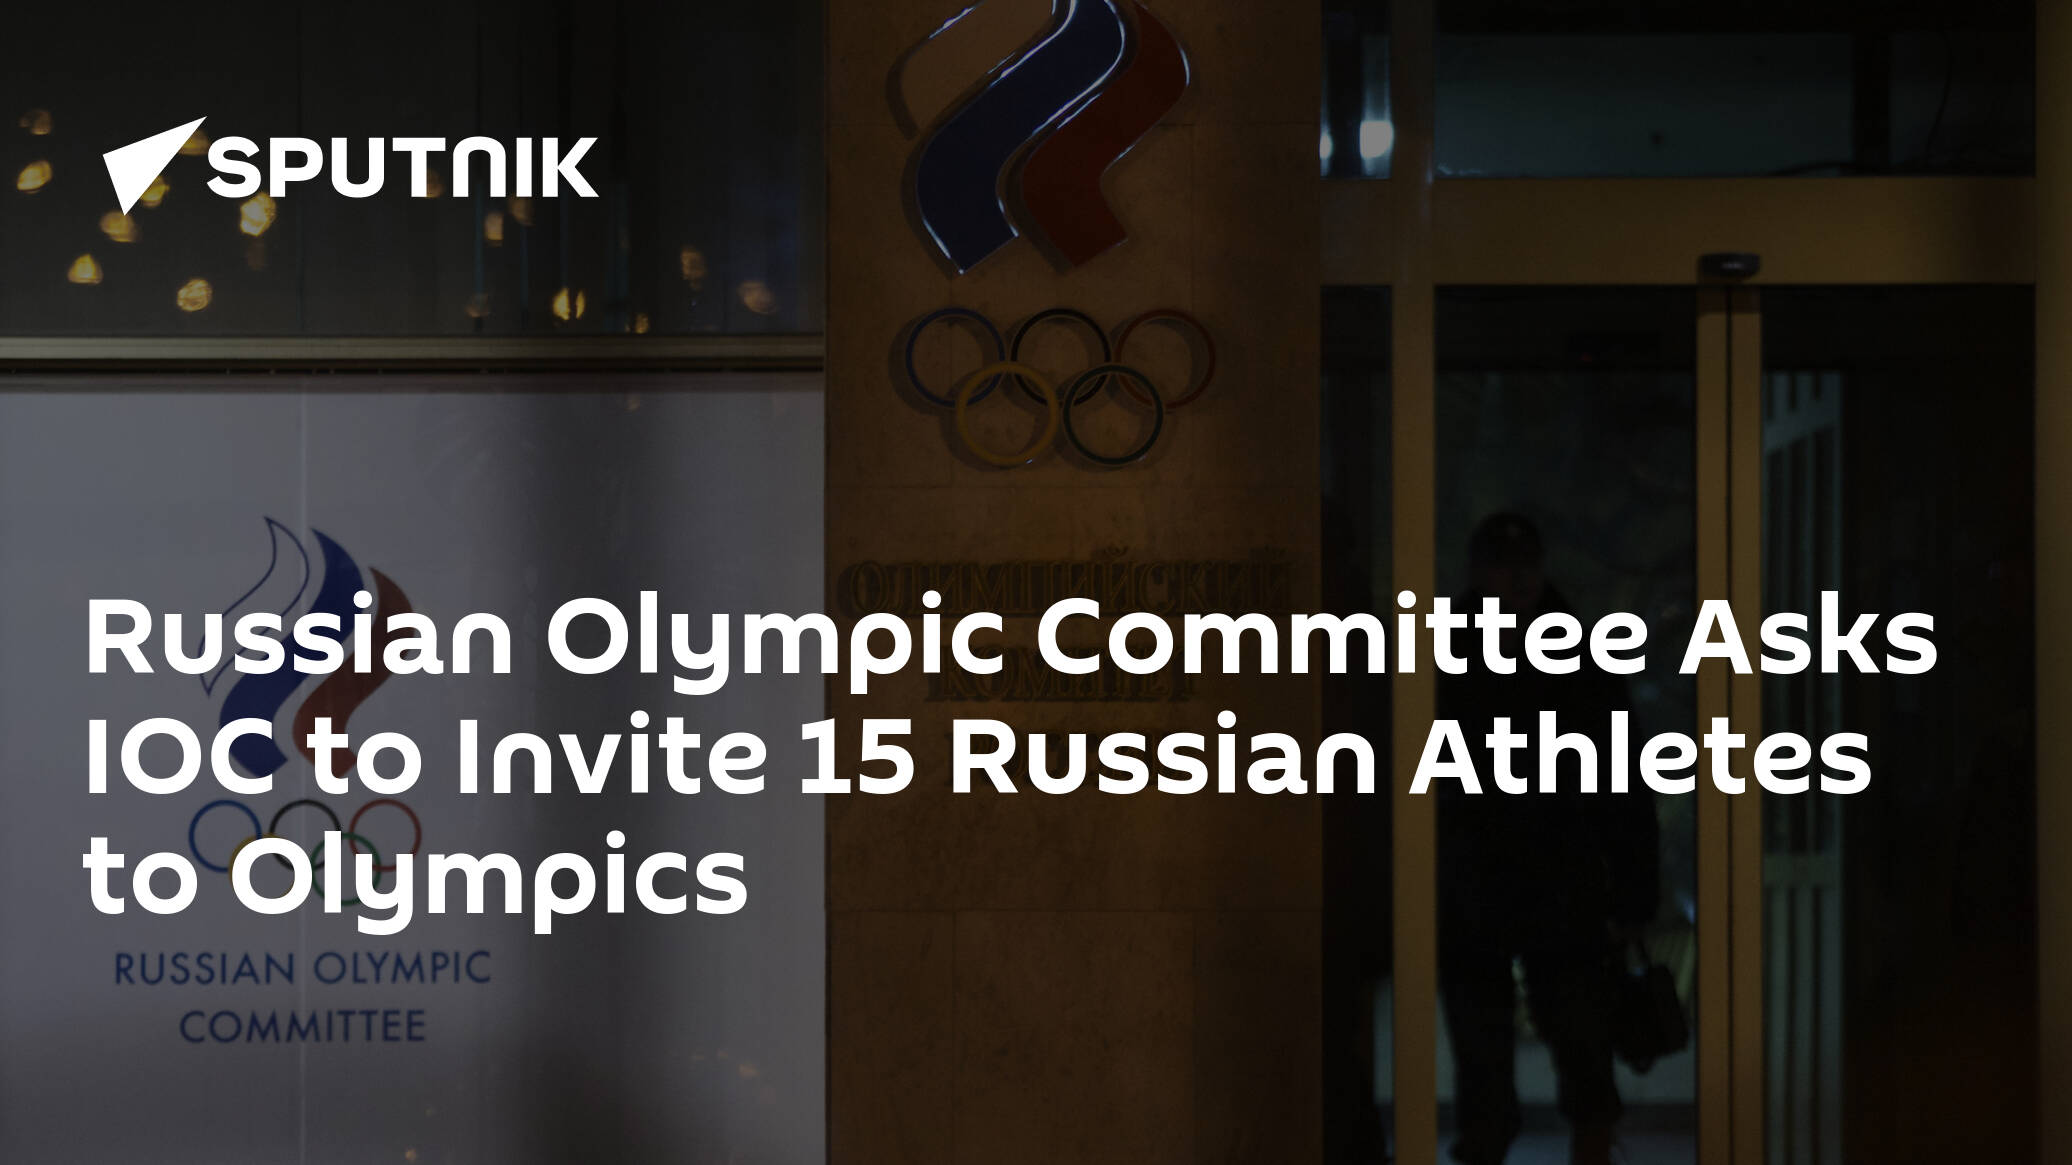 Russian Olympic Committee Asks IOC to Invite 15 Russian Athletes to